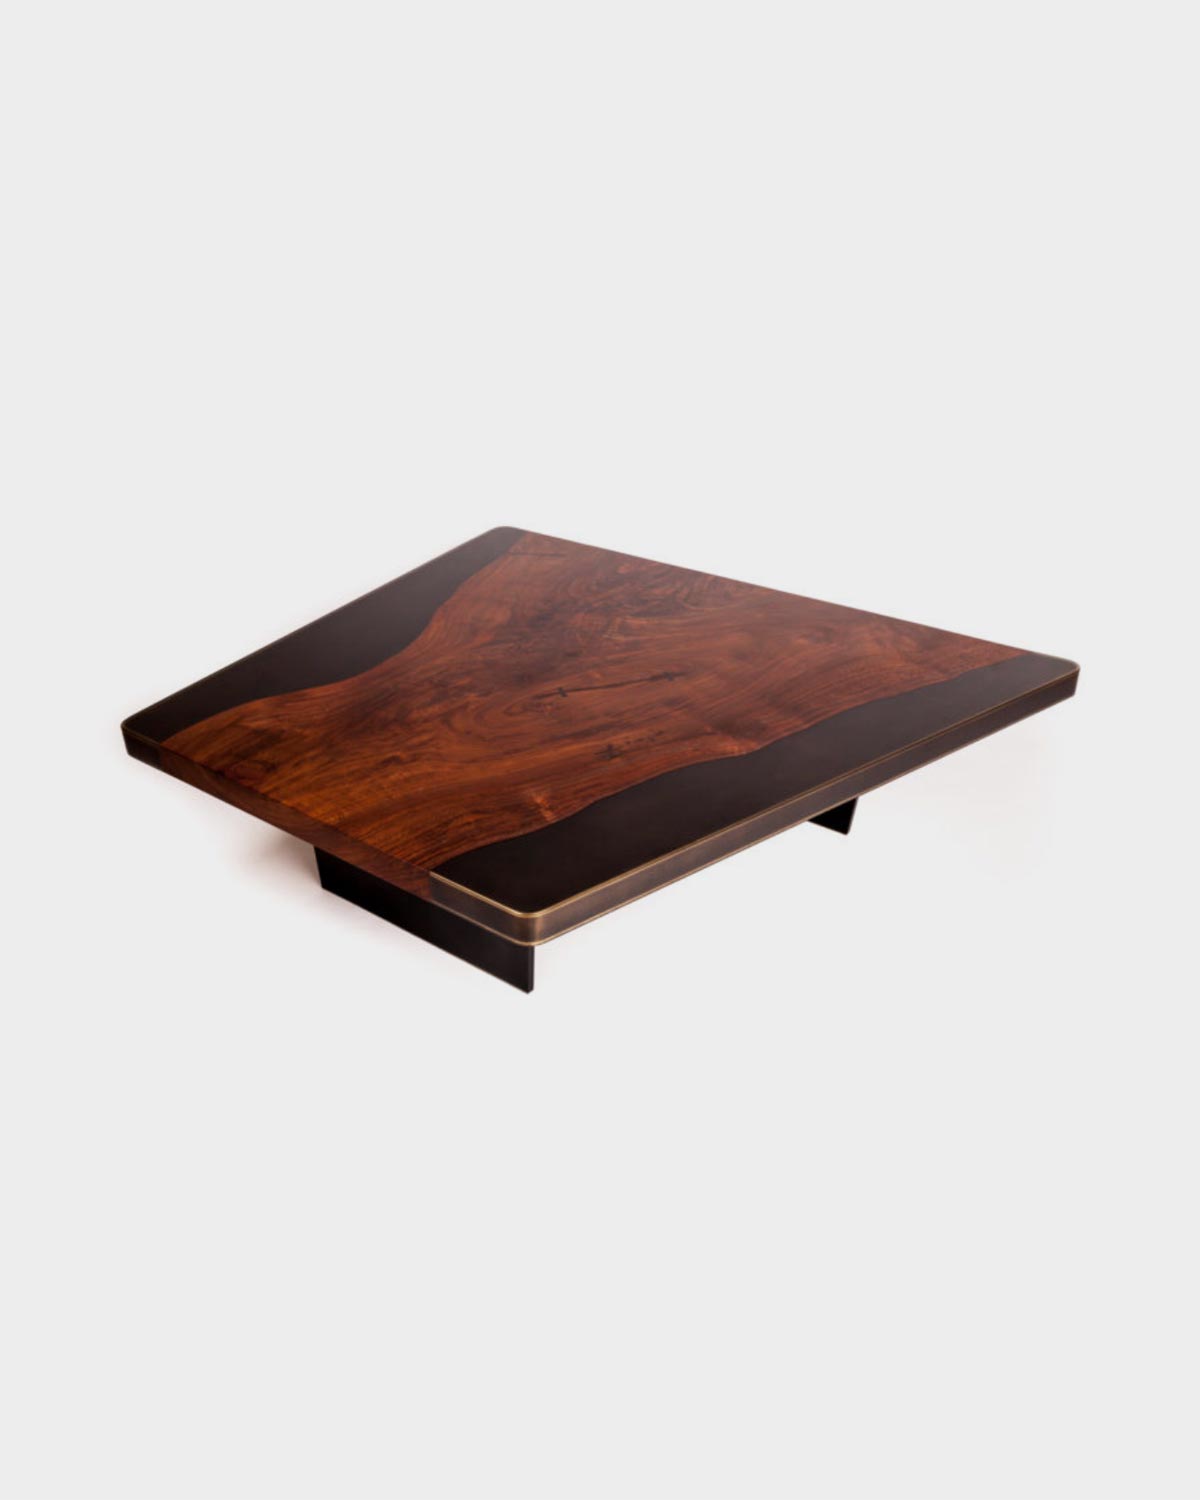 The Nola Coffee Table by WUD